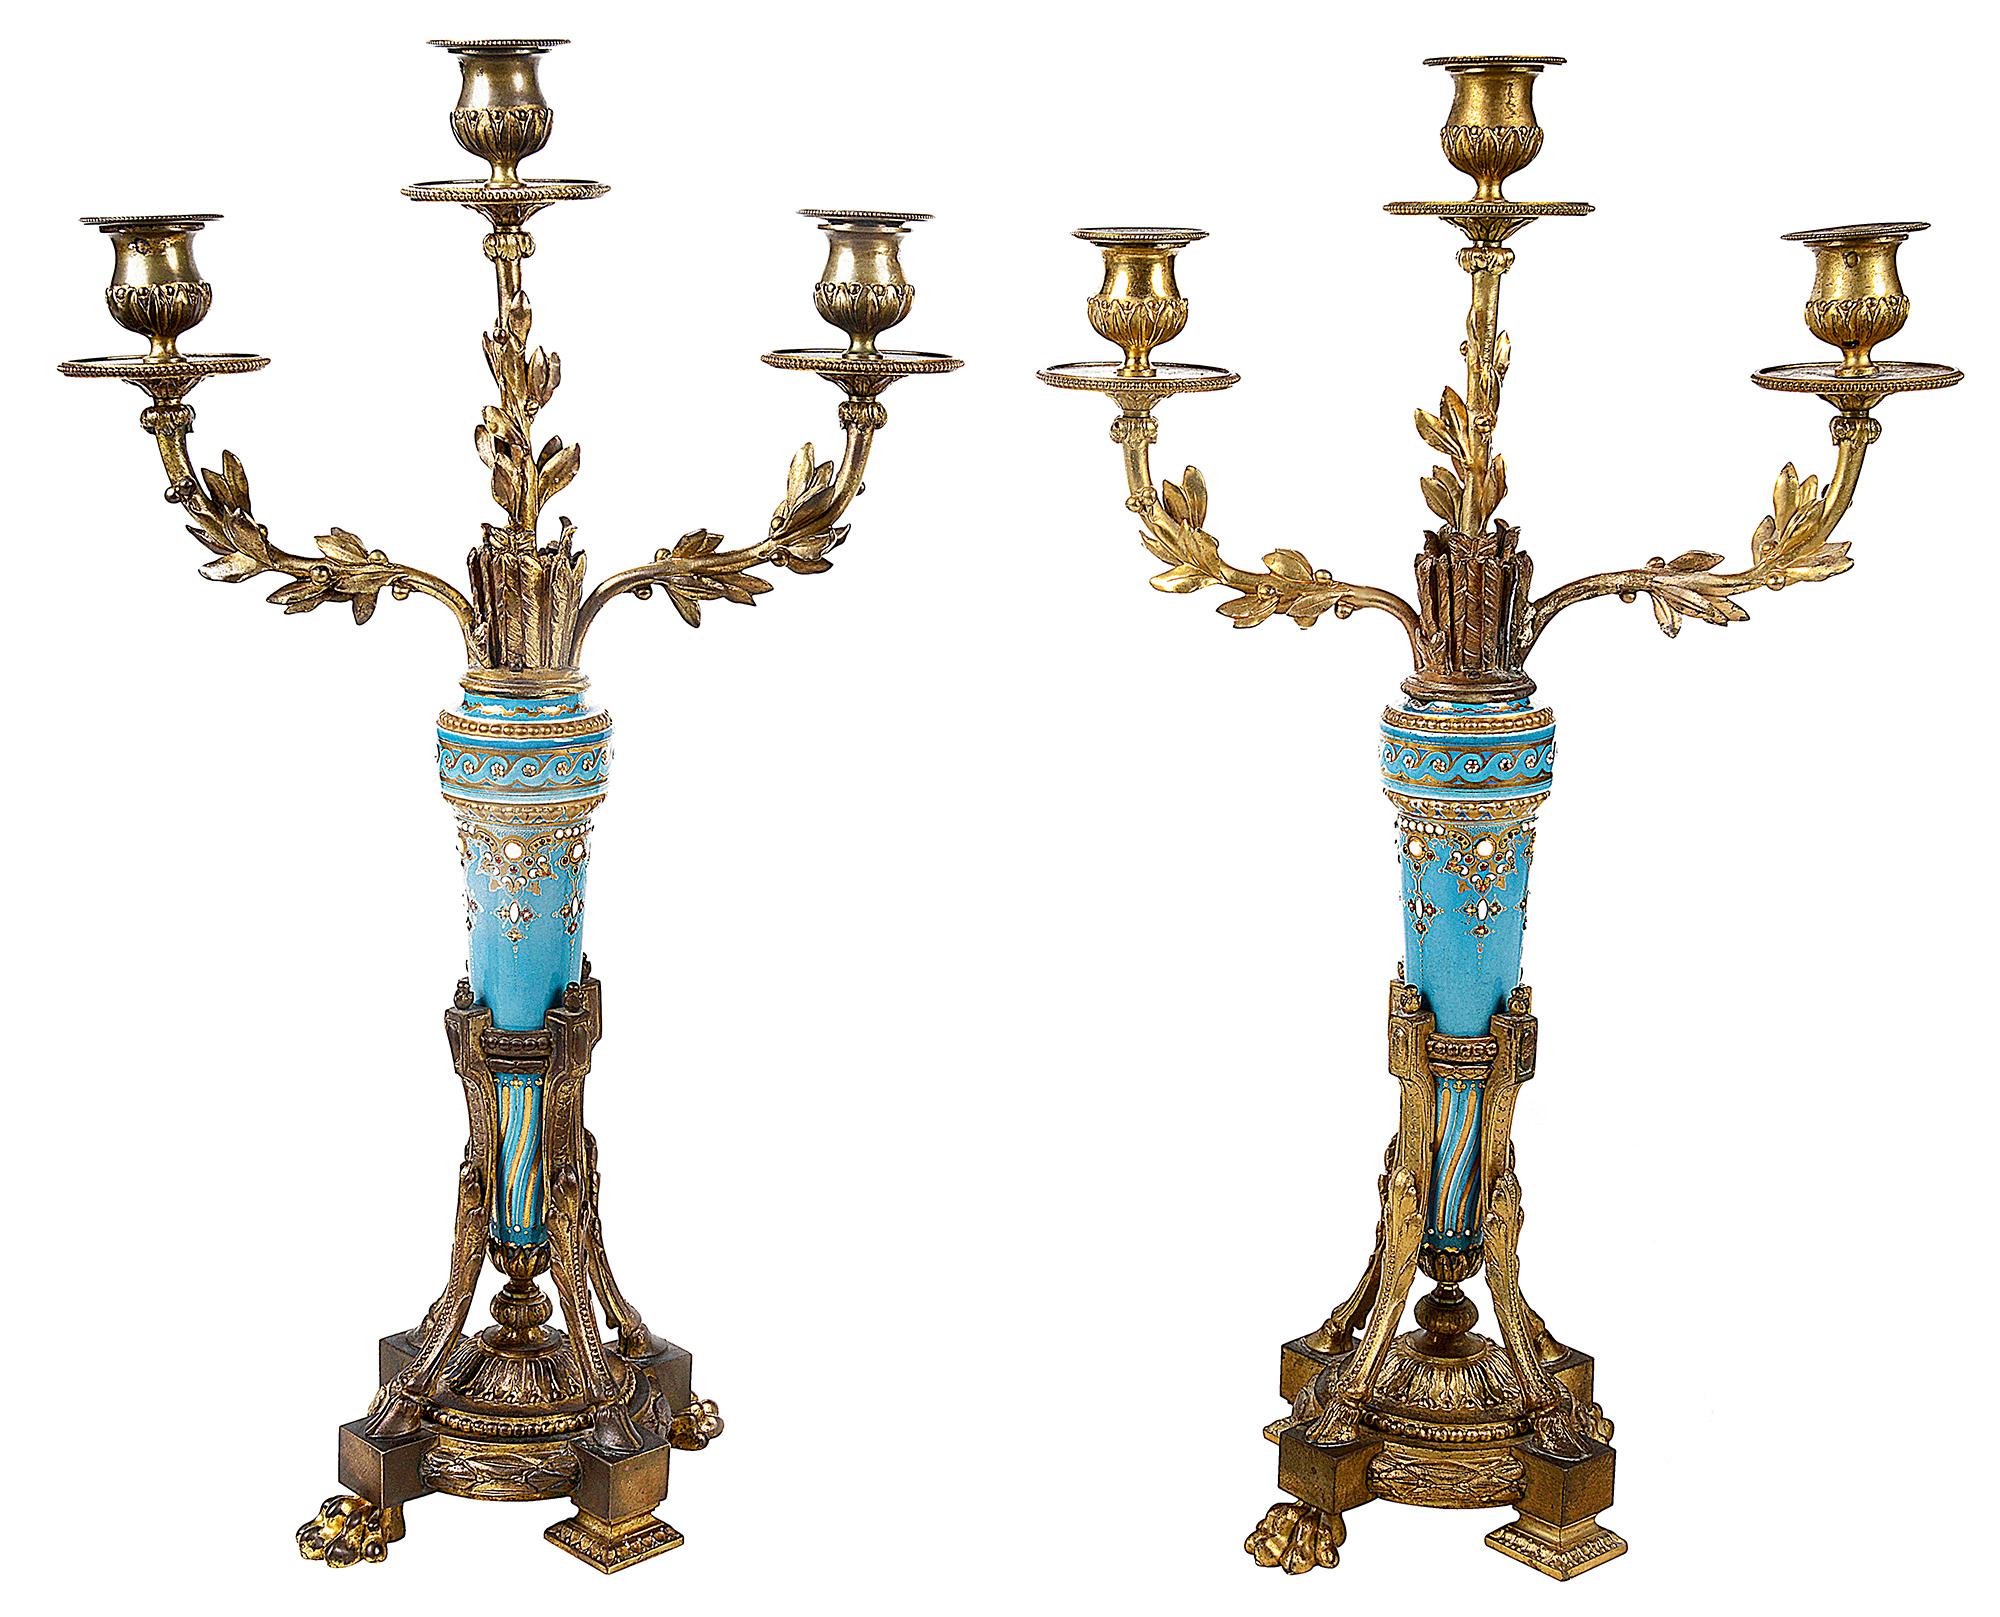 Pair of Louis XVI style candelabra, each with bold turquoise ground arrow sheaths with jewelled and gilded decoration, three branch sconces with foliate detail. Raised on triform bases with hoof and claw feet.
 